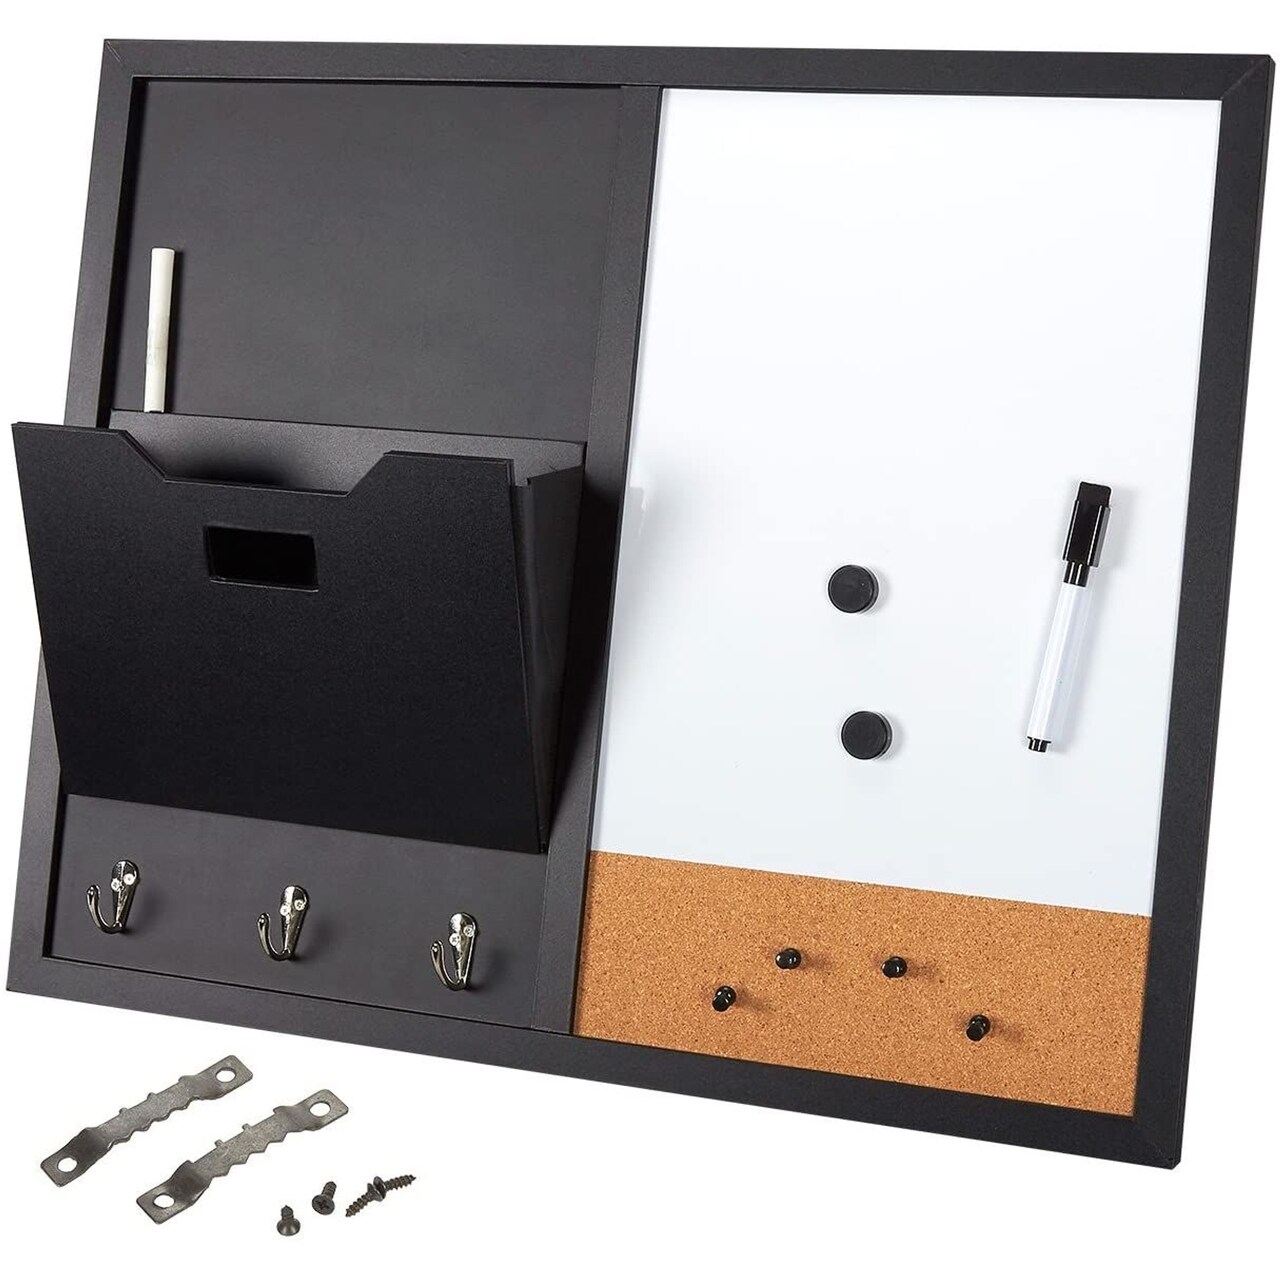 Juvale Message Center & Wall Mounted Organizer, with Whiteboard